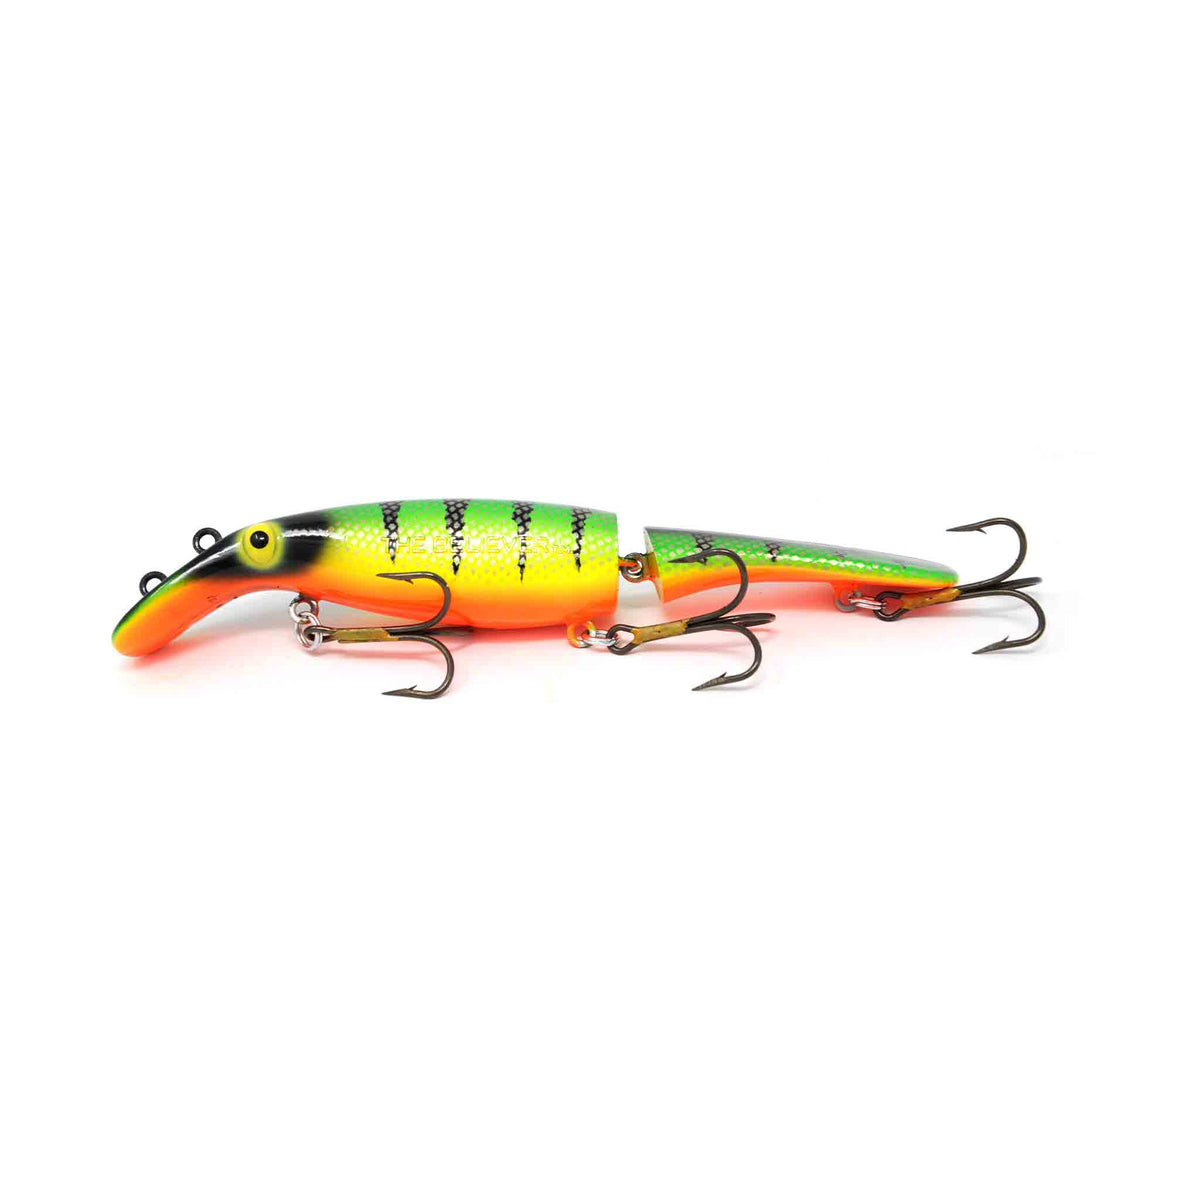 View of Crankbaits Drifter Tackle Believer Jointed 8" Crankbait Fire Perch available at EZOKO Pike and Musky Shop